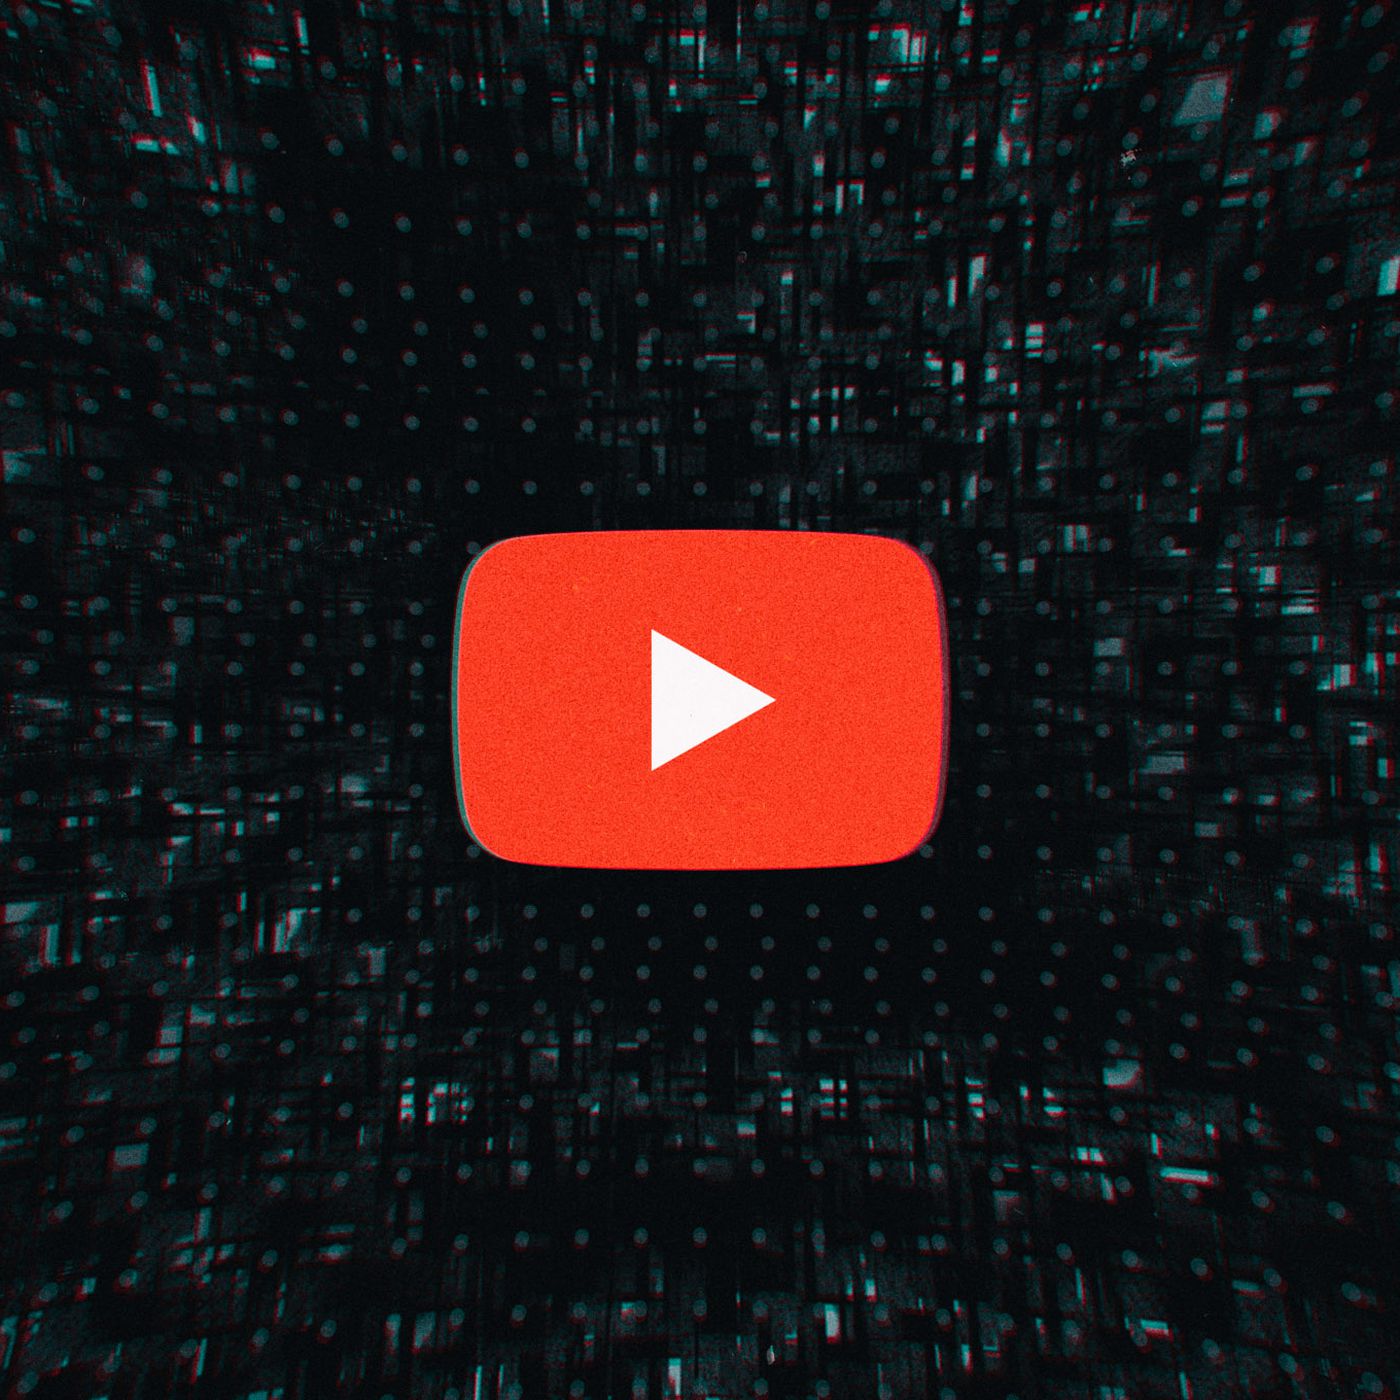 Youtube Is Reducing Its Default Video Quality To Standard